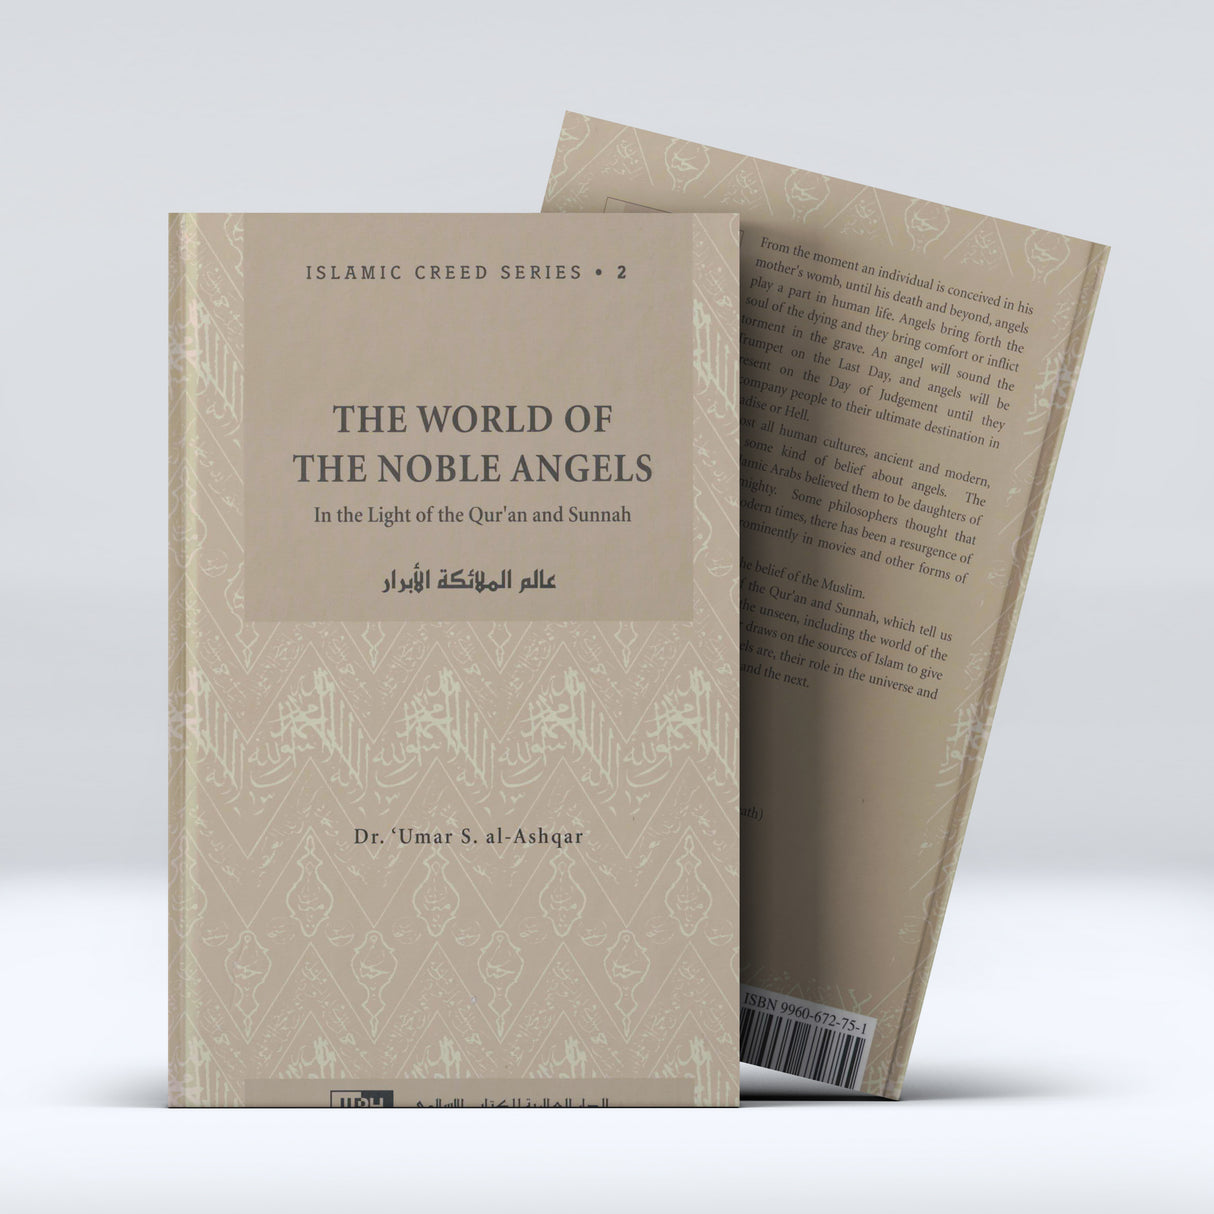 Islamic Creed Series Vol. 2 - The World of The Noble Angels